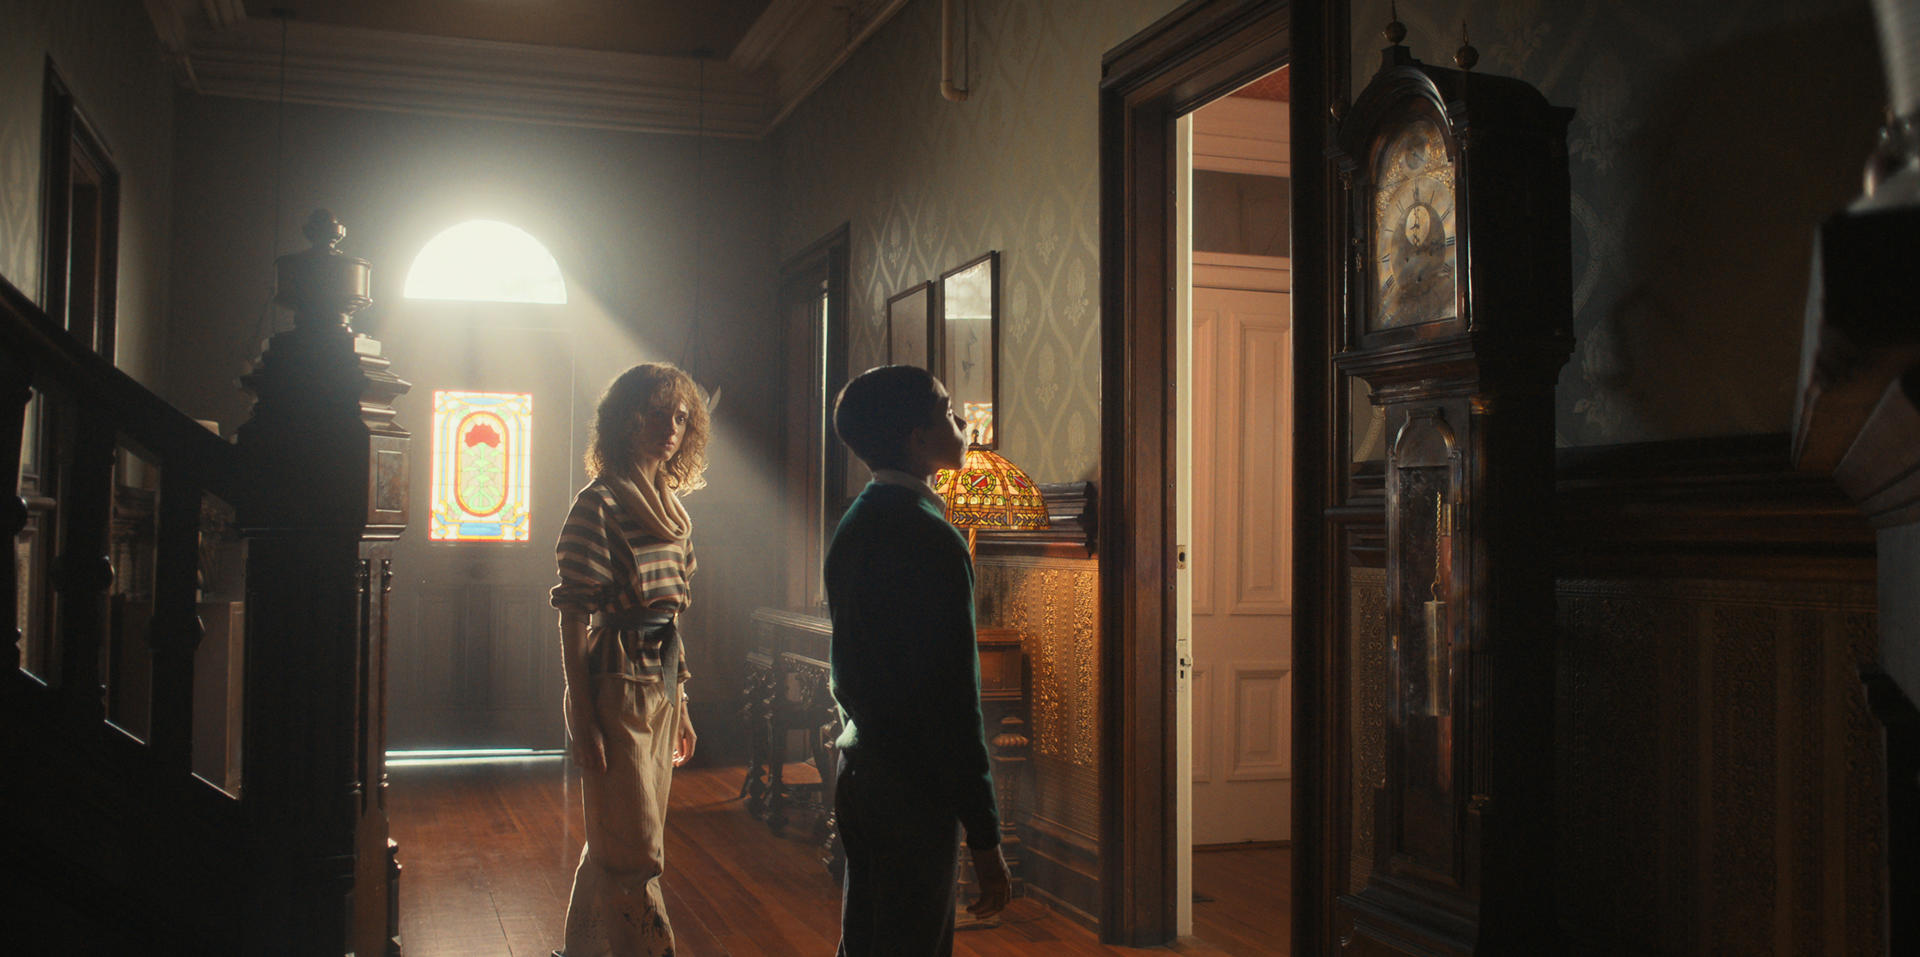 Nancy (Natalia Dyer) watches Henry Creel (Raphael Luce) stares at a grandfather clock in 'Stranger Things' 4 Vol. I